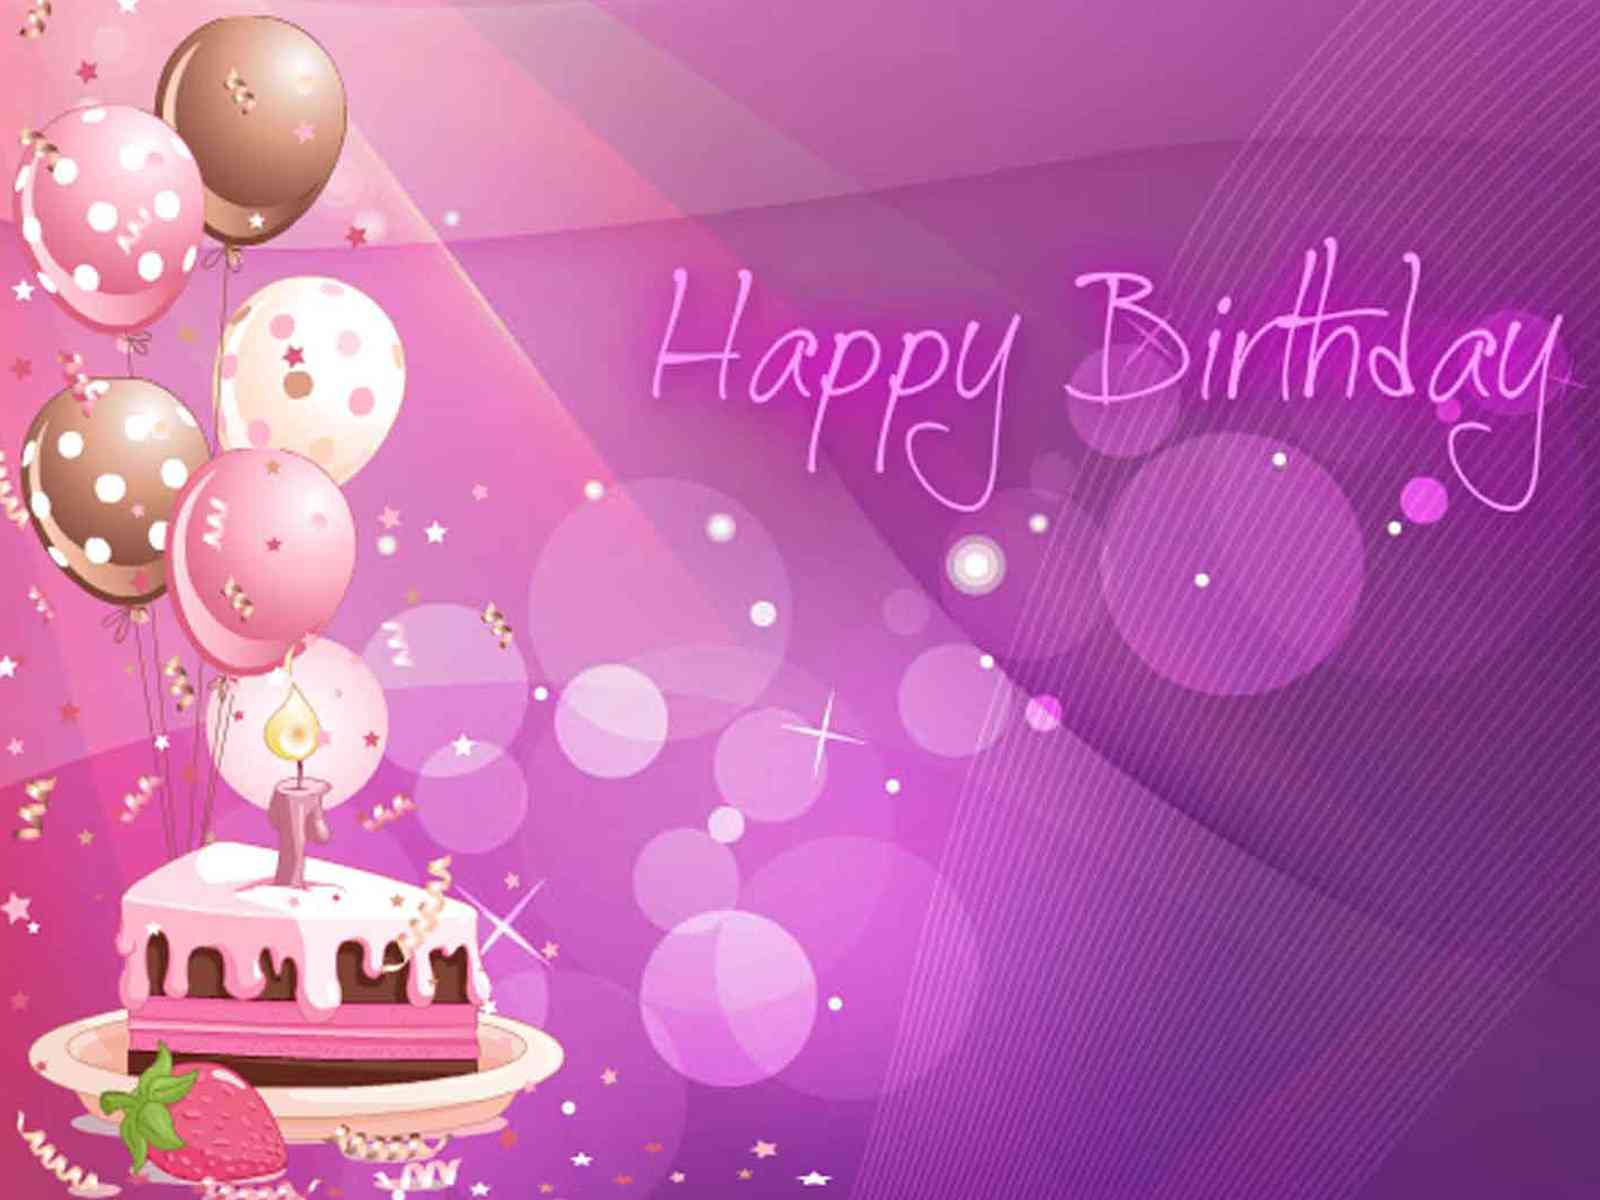  Happy birthday wishes 2015 hd wallpapers and Birthday backgrounds 1600x1200